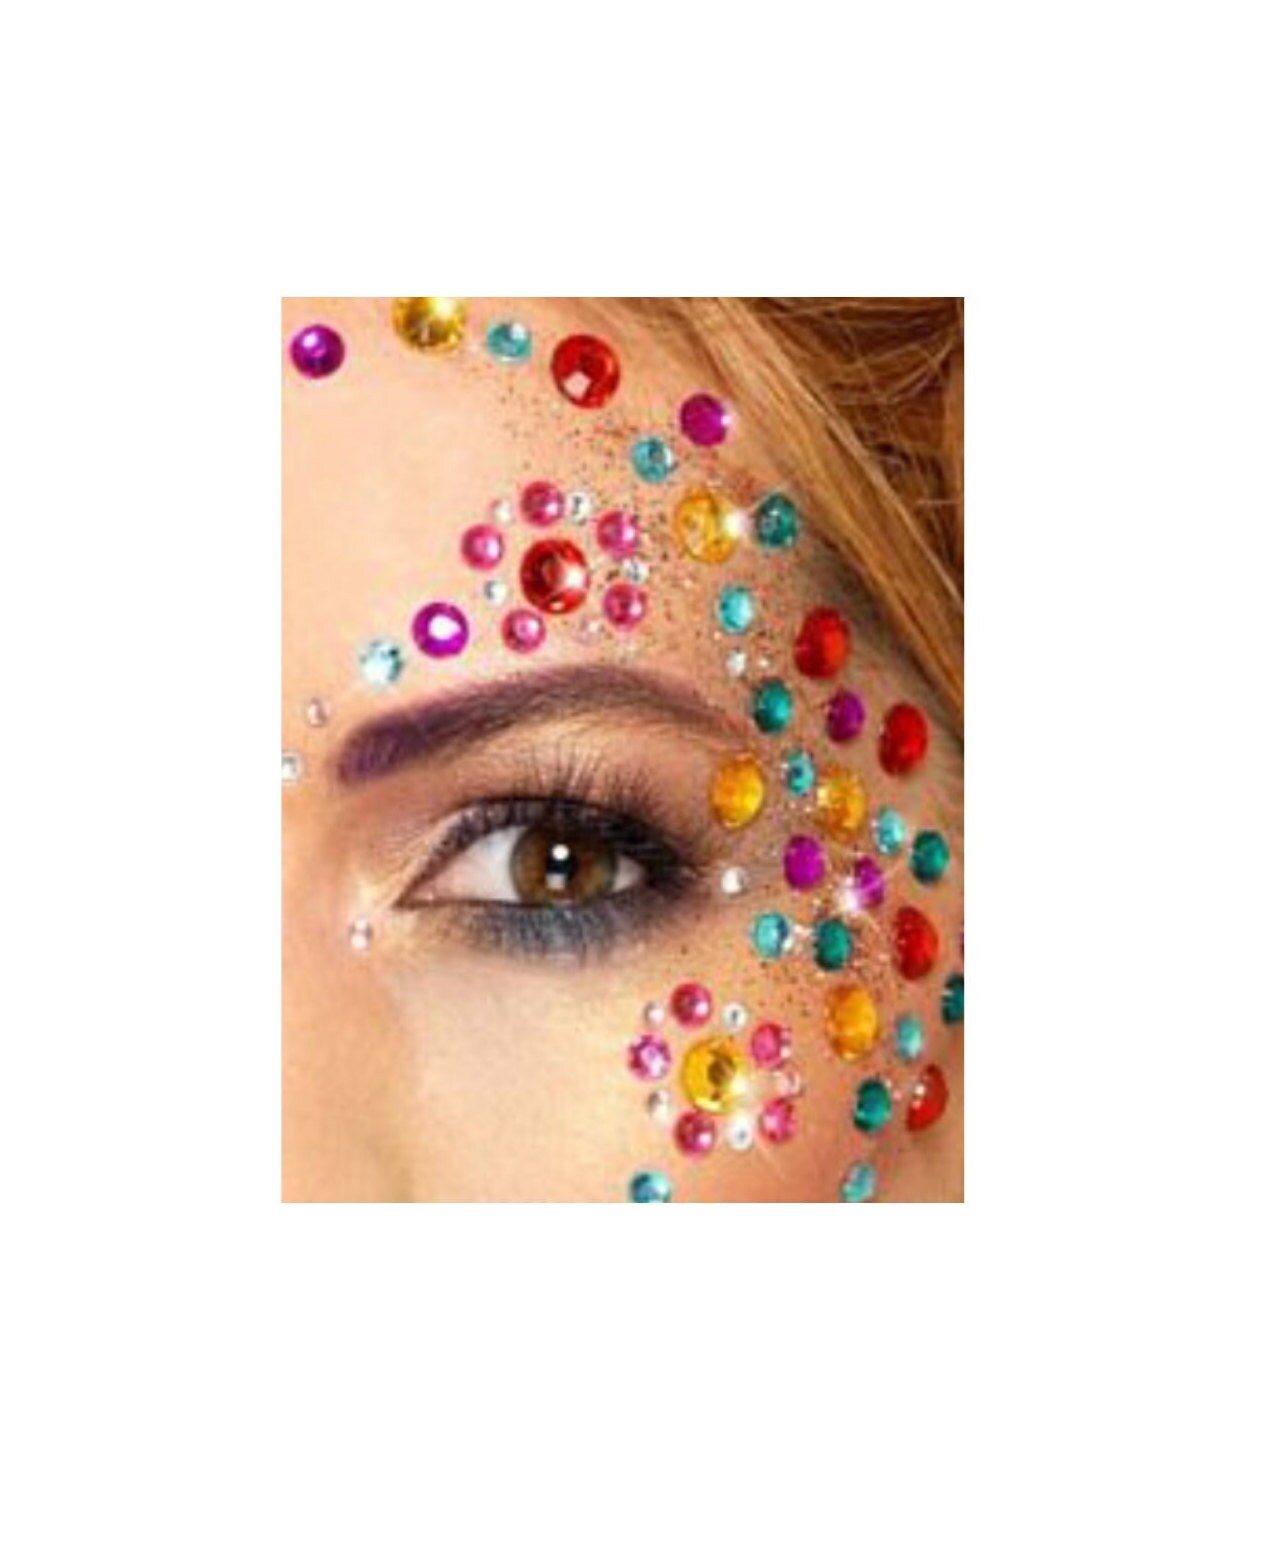 Festival Face Gems Adhesive Stick on Jewels Sticker Rave Party Body 